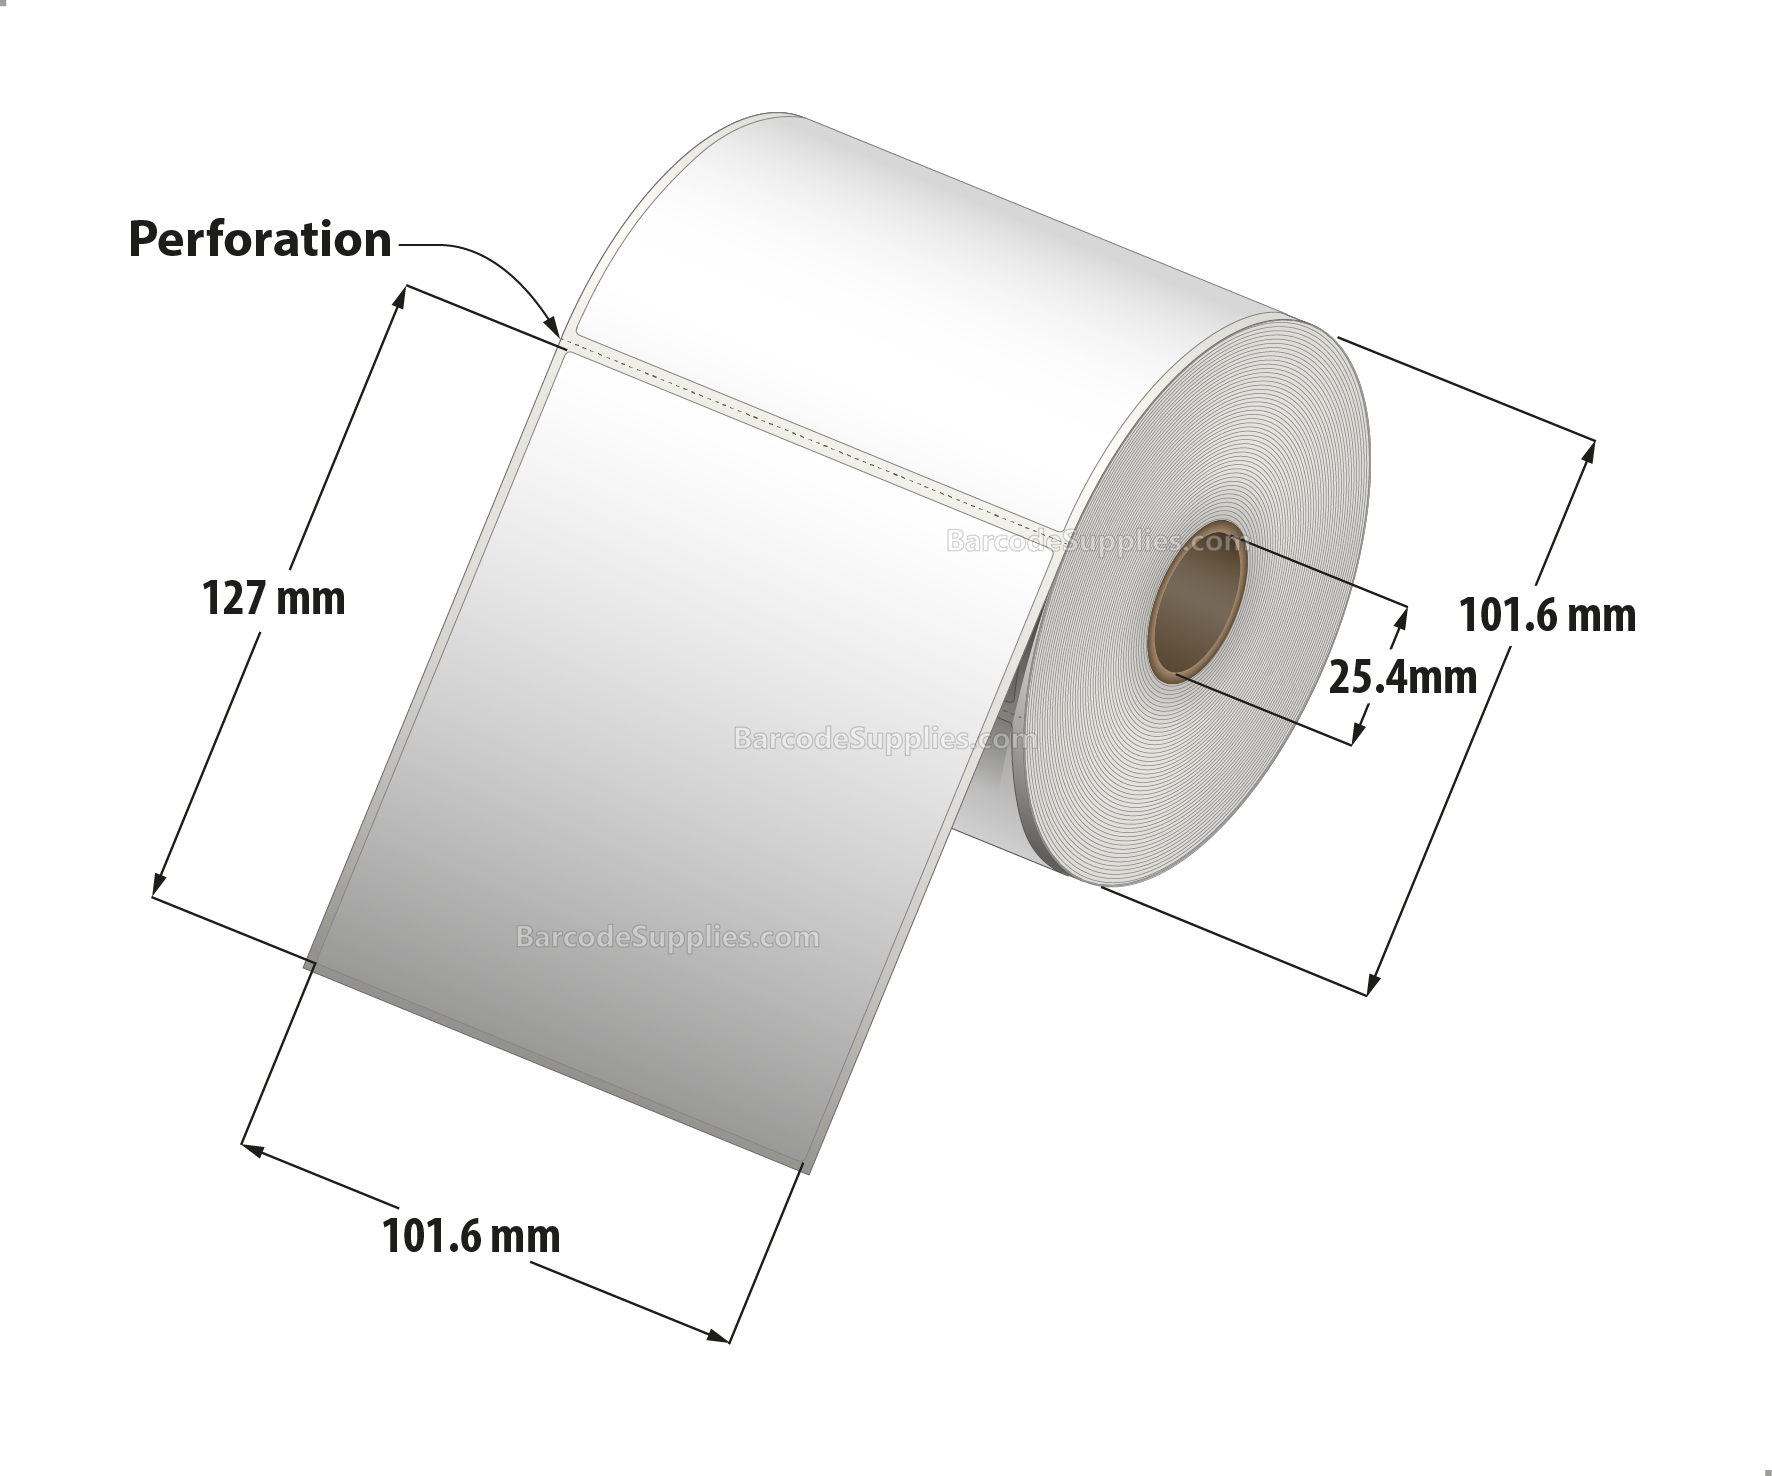 4 x 5 Thermal Transfer White Labels With Rubber Adhesive - Perforated - 305 Labels Per Roll - Carton Of 12 Rolls - 3660 Labels Total - MPN: RTT4-400500-1P